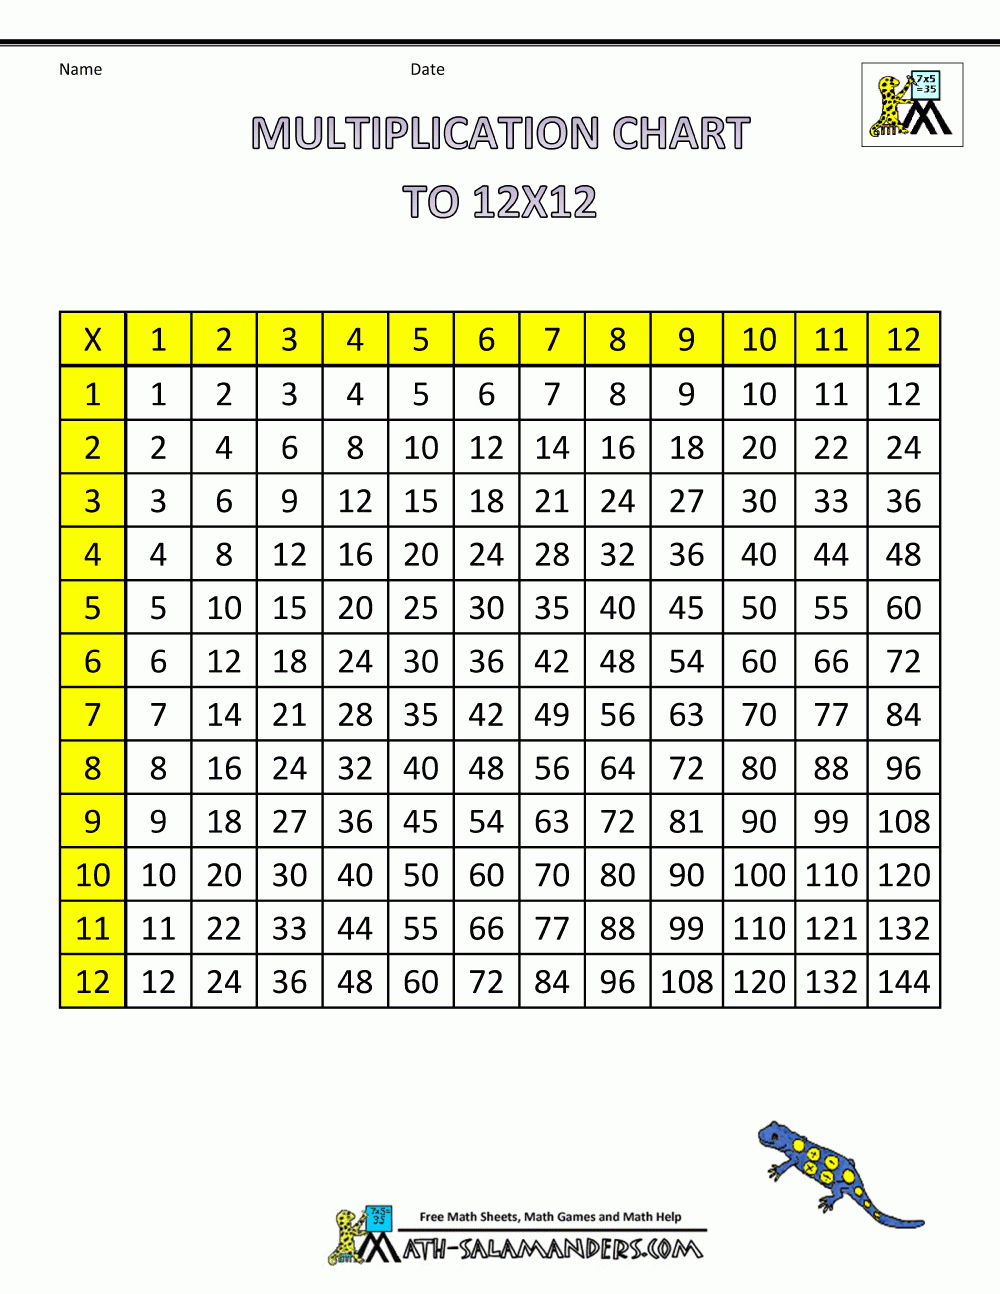 Multiplication Chart Times Tables To 12X12 1Col for Printable Blank Multiplication Table 0-12